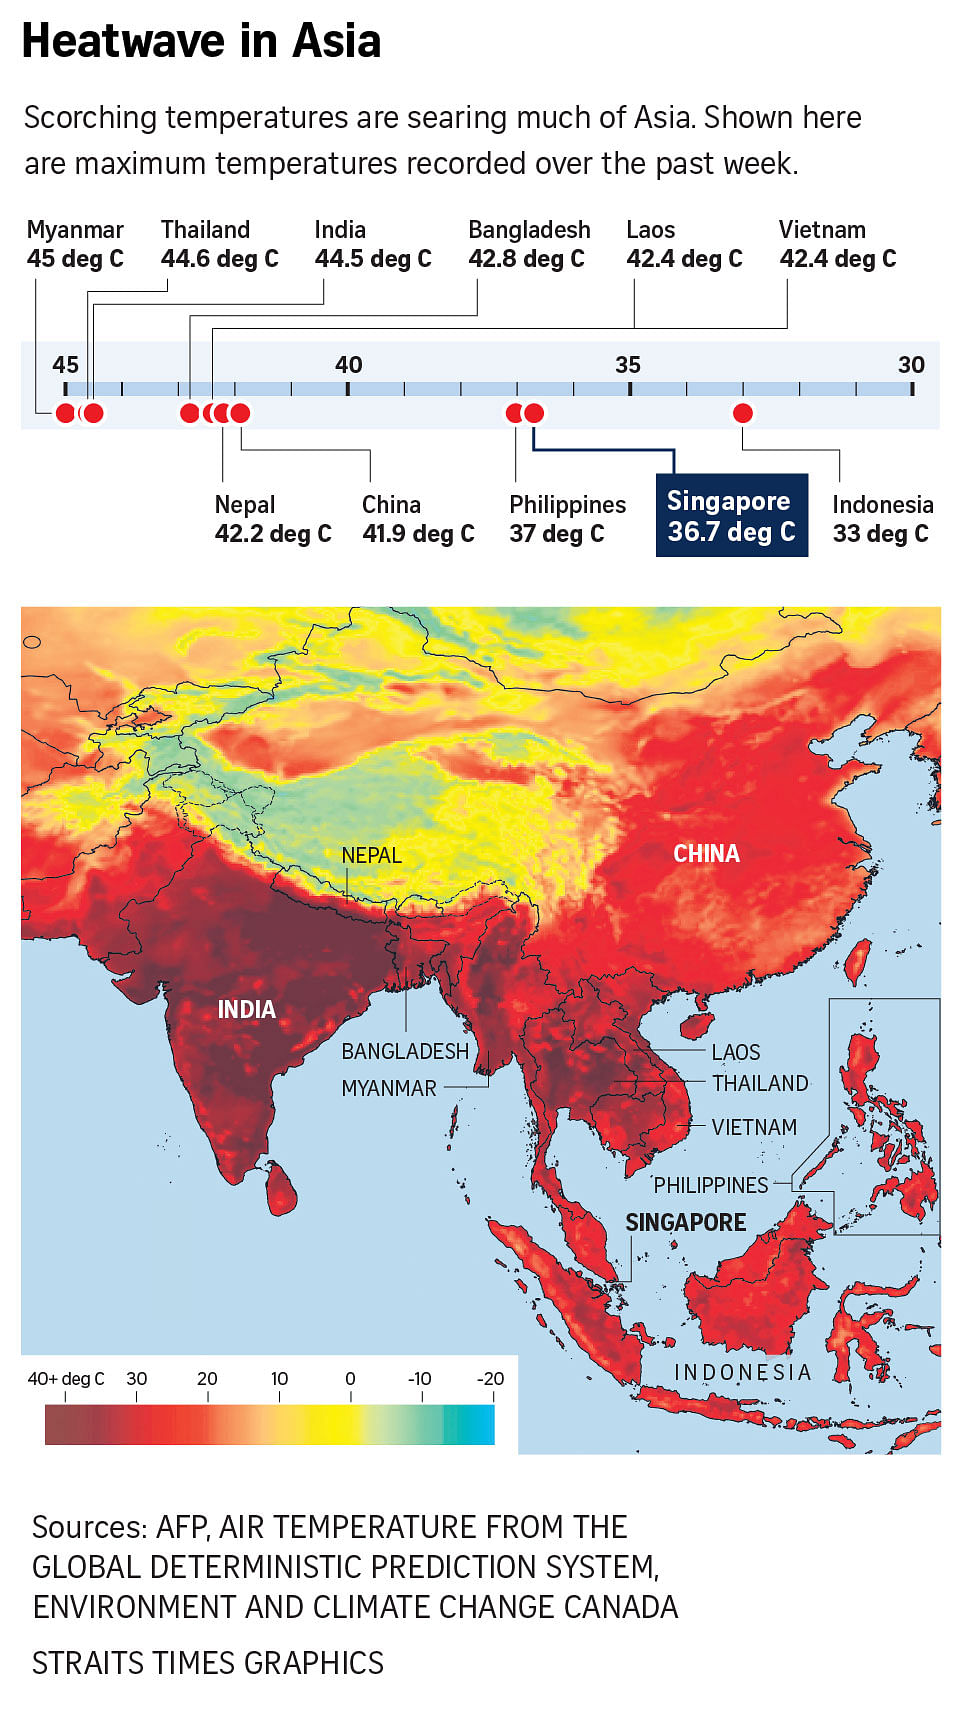 Record heatwave of up to 45 deg C scorches much of Asia, and it’s going